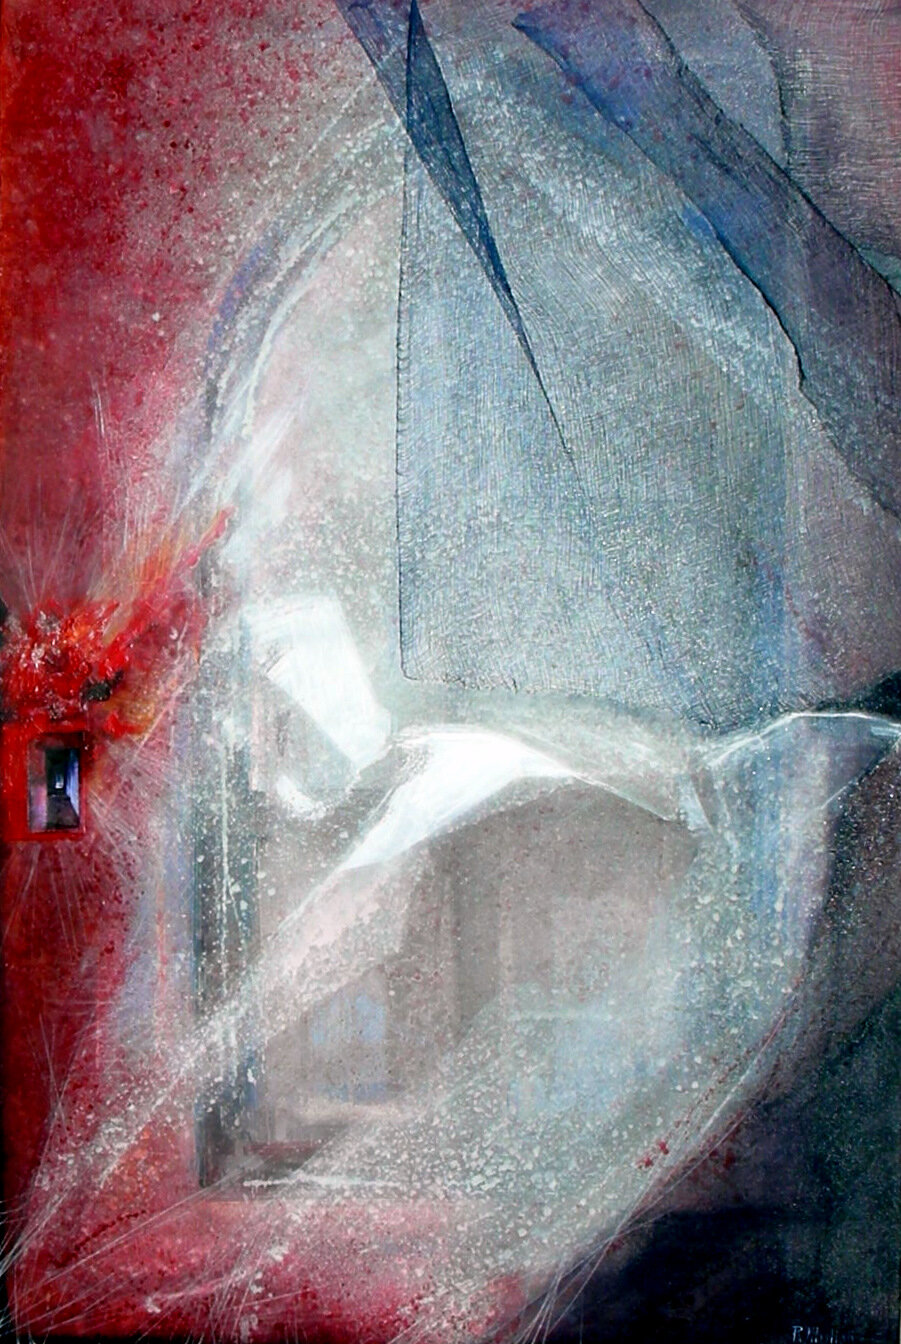  Inside and Outside: One Space, 2010 72 x 48 inches Acrylic, gauze, mixed media on canvas 